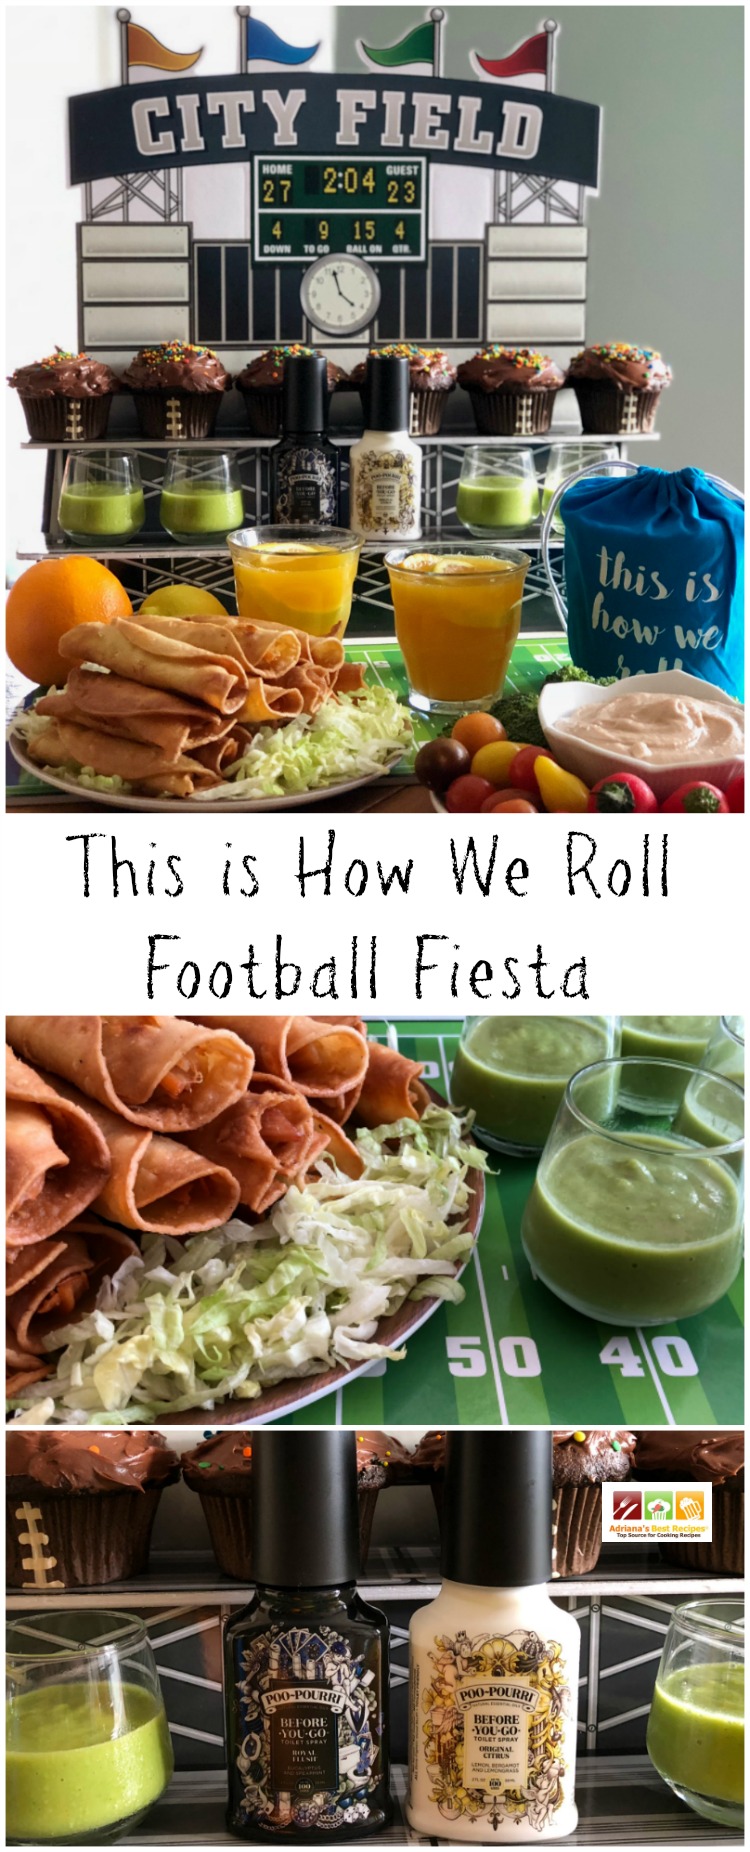 Learn how we roll when organizing a football fiesta at home